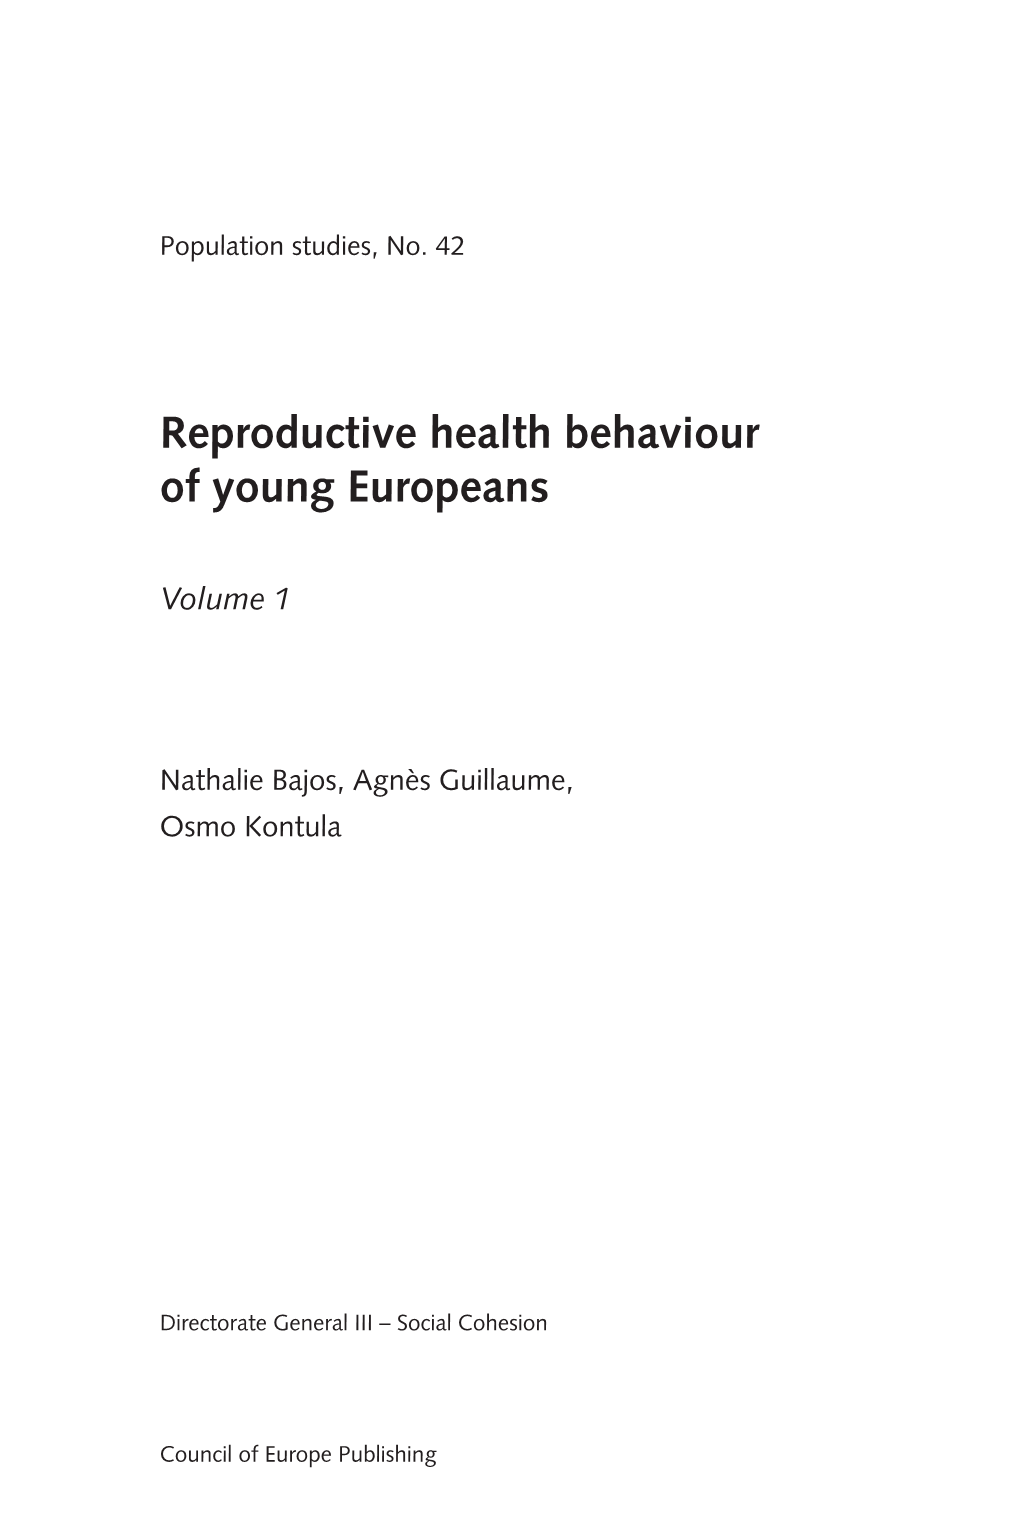 Reproductive Health Behaviour of Young Europeans